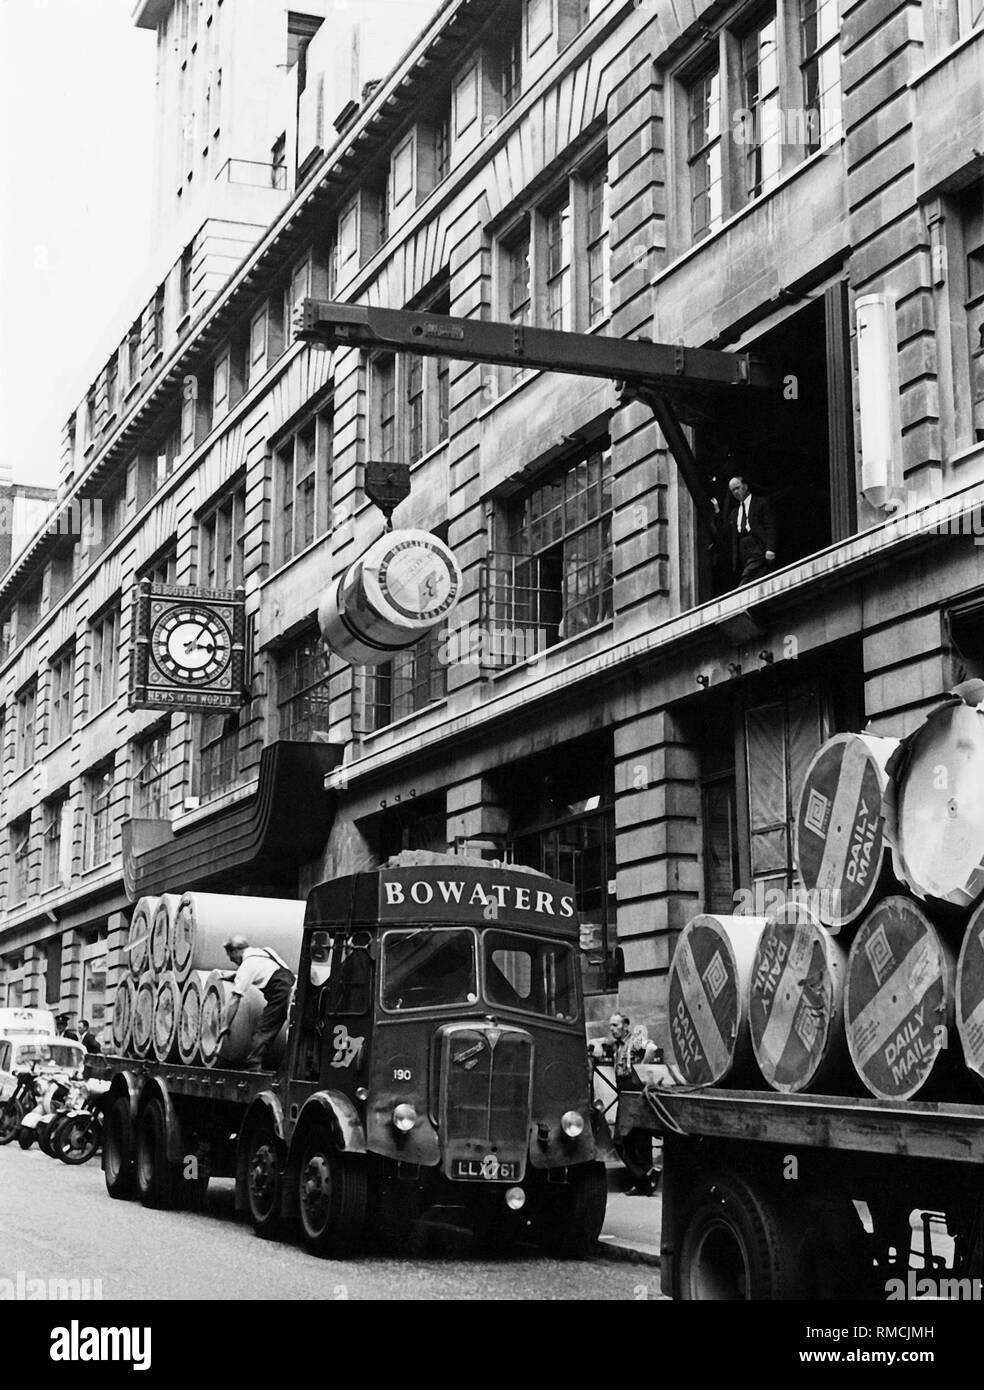 The publishing house of the newspaper 'News of the world' on Bouverie Street near Fleet Street receives a paper delivery. The area around Fleet Street was for centuries the center of English press. Stock Photo